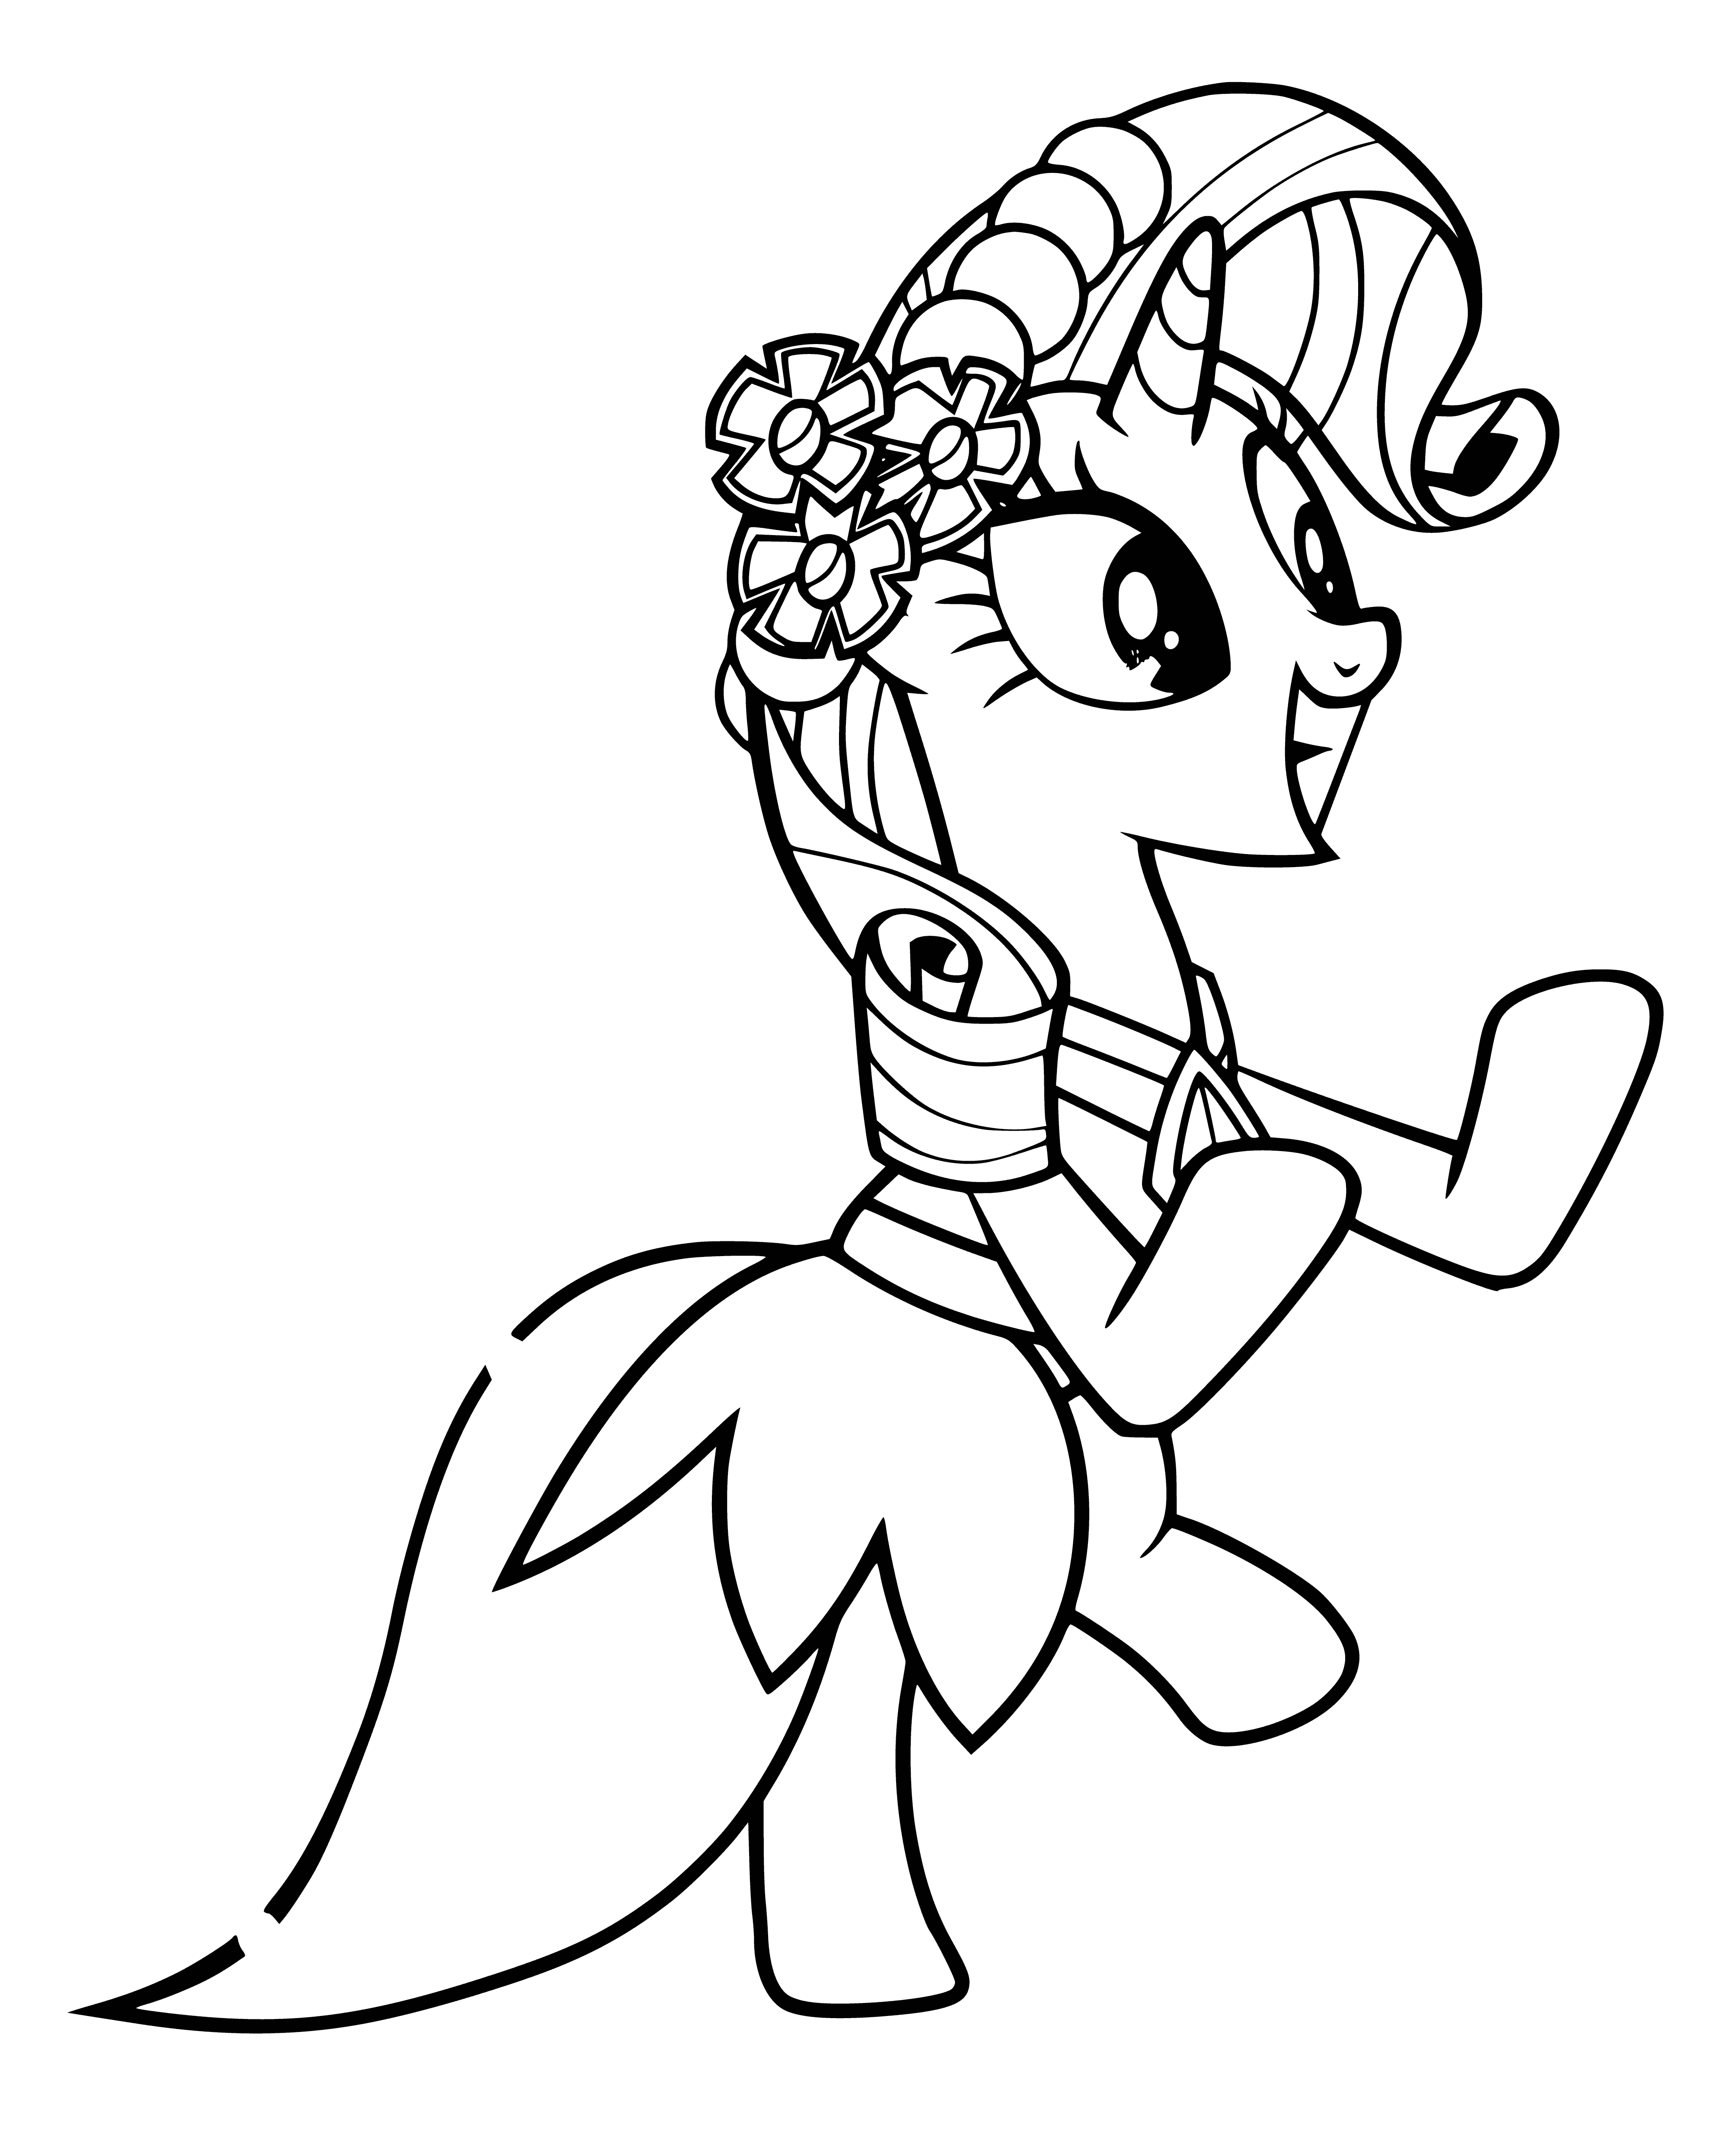 coloring page: Rarity is surprised, wearing a tiara & necklace, light purple in her mane & tail with her hand to her chest and eyes wide. #MLPColoring